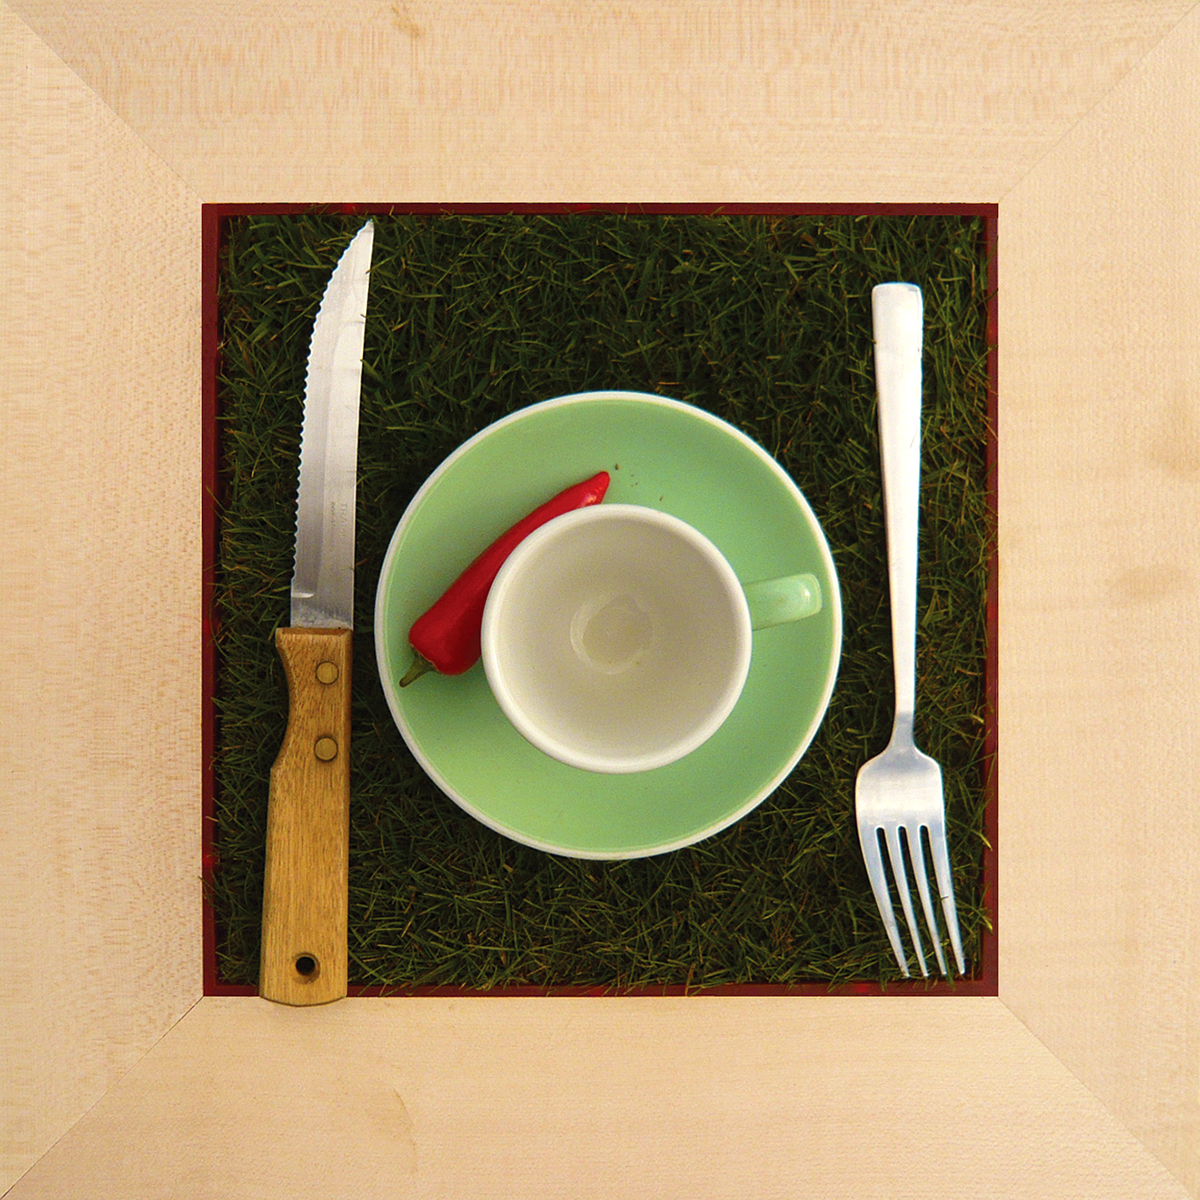 grass table picnic indoor experimental interactive furniture alive Nature growth wood cup of tea work in progress documentation